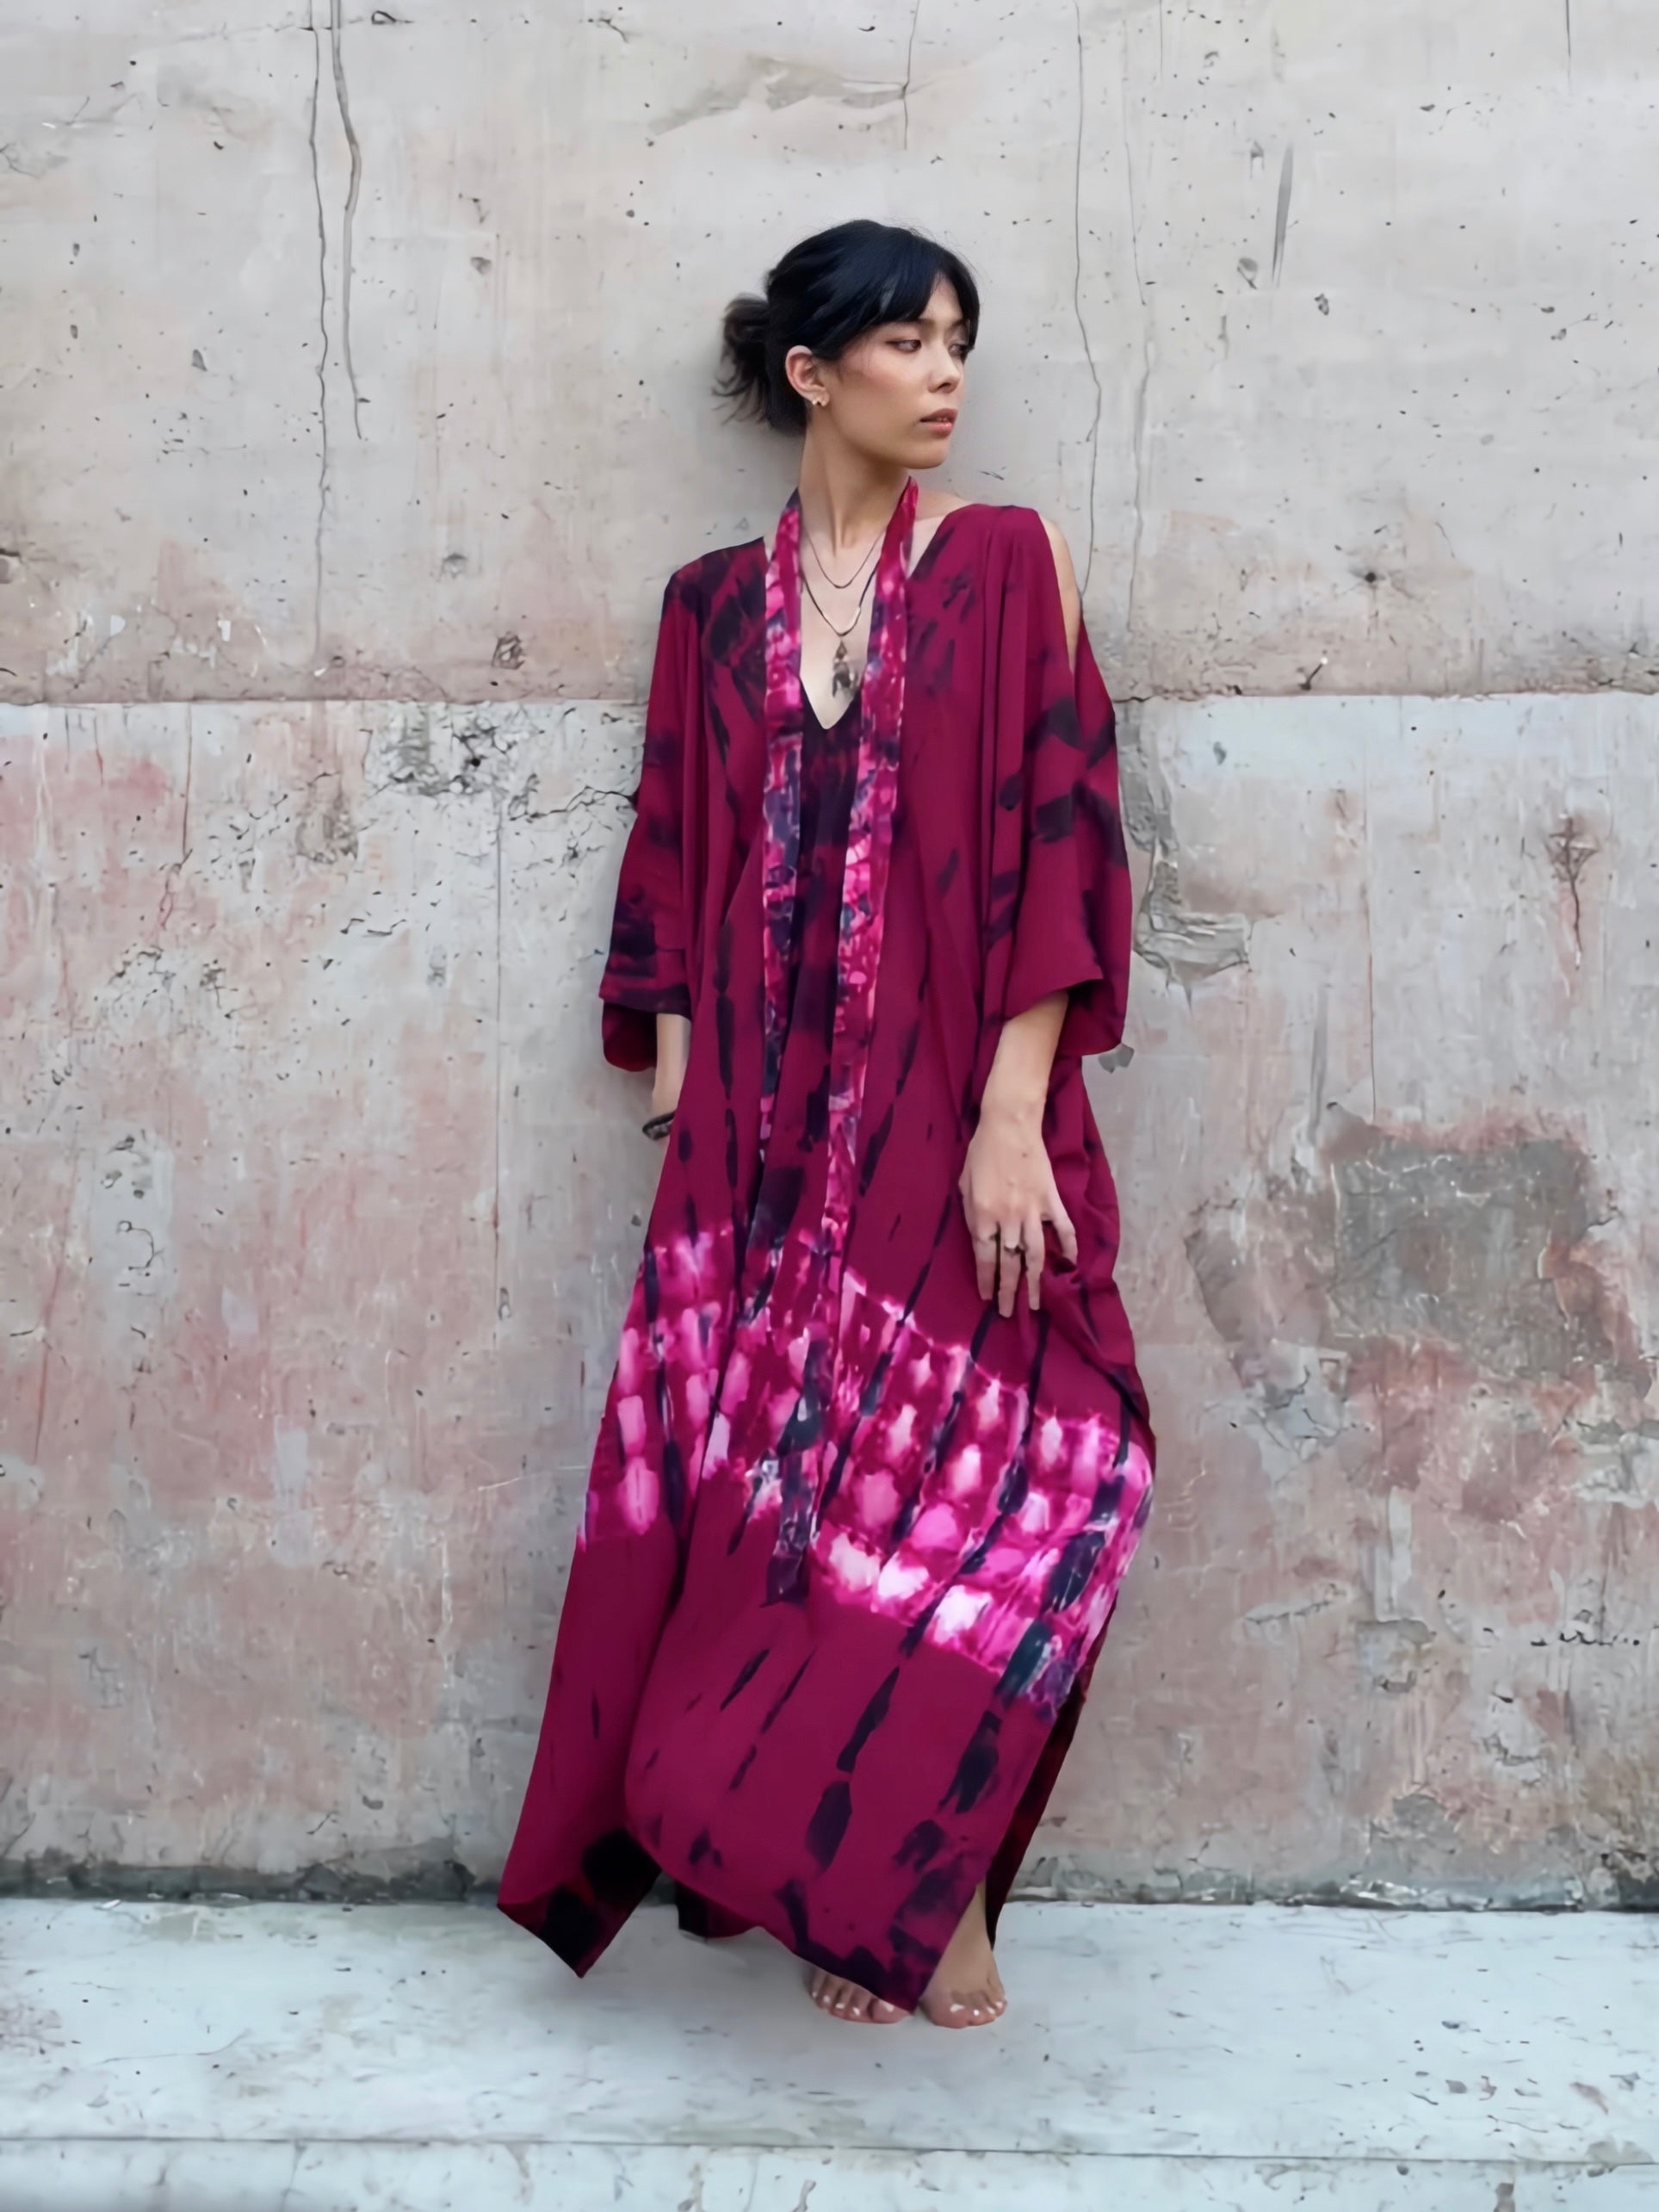 Shop our Fara Tie-Dye Kaftan, a one-of-a-kind convertible dress suitable for every occasion. This sustainable dress exudes a captivating bohemian charm that's both eco-friendly and stylish. Wear it as a maxi dress for beach dress, style it as a bohemian dress for a festival, or throw it on as a beach cover-up. Show off your free-spirited style wherever you go!